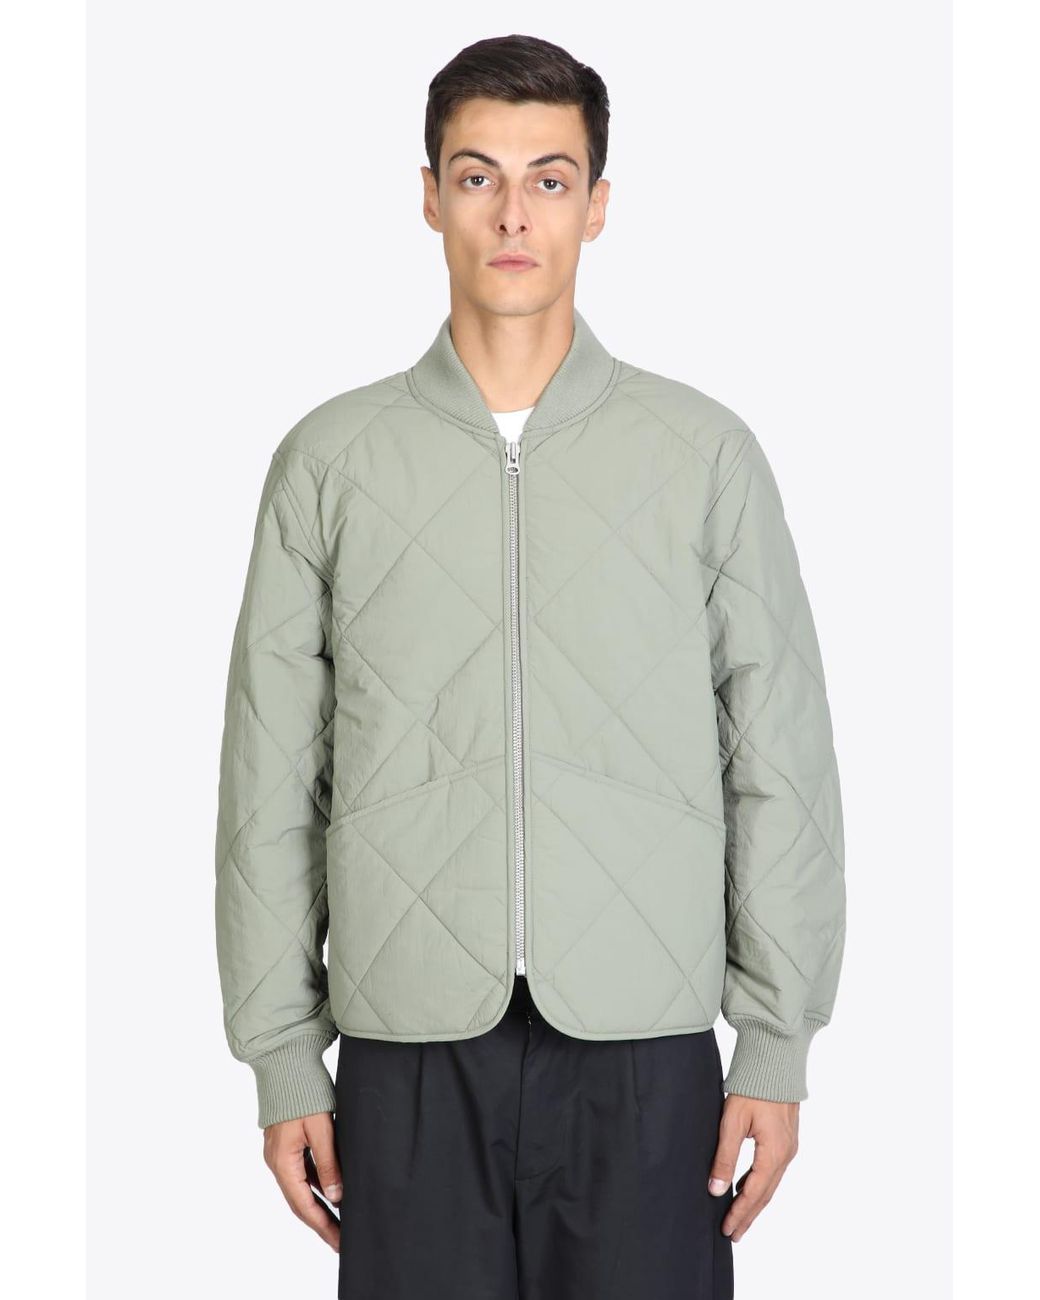 Stussy Dice Quilted Liner Jacket Olive Green Quilted Jacket With Dice